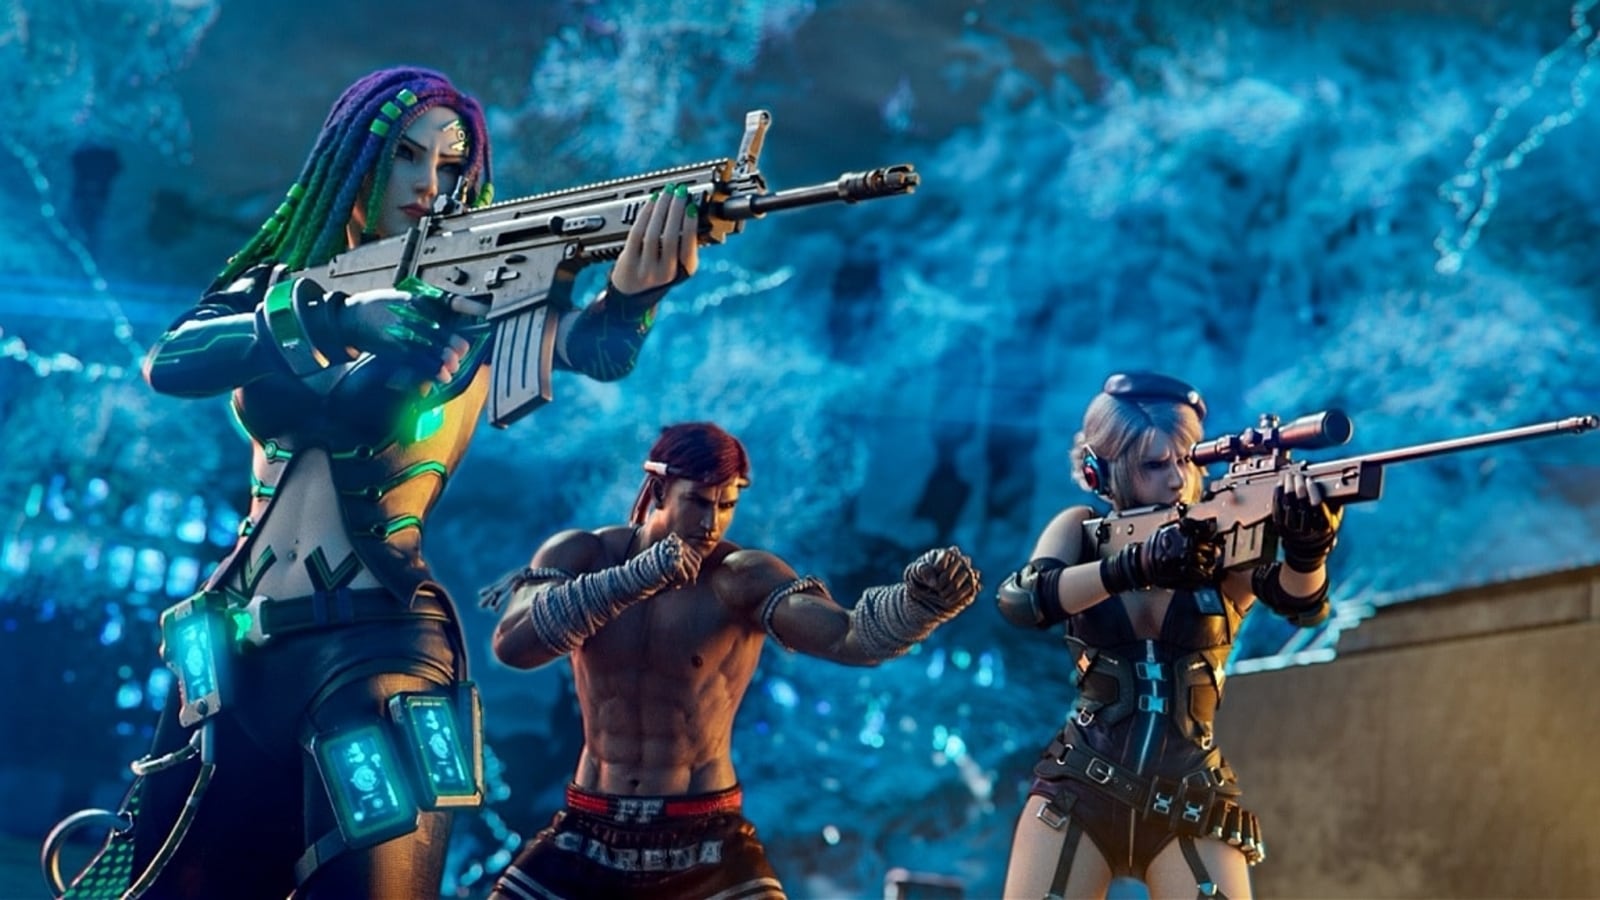 5 best ways to get free diamonds for Free Fire MAX in June 2022